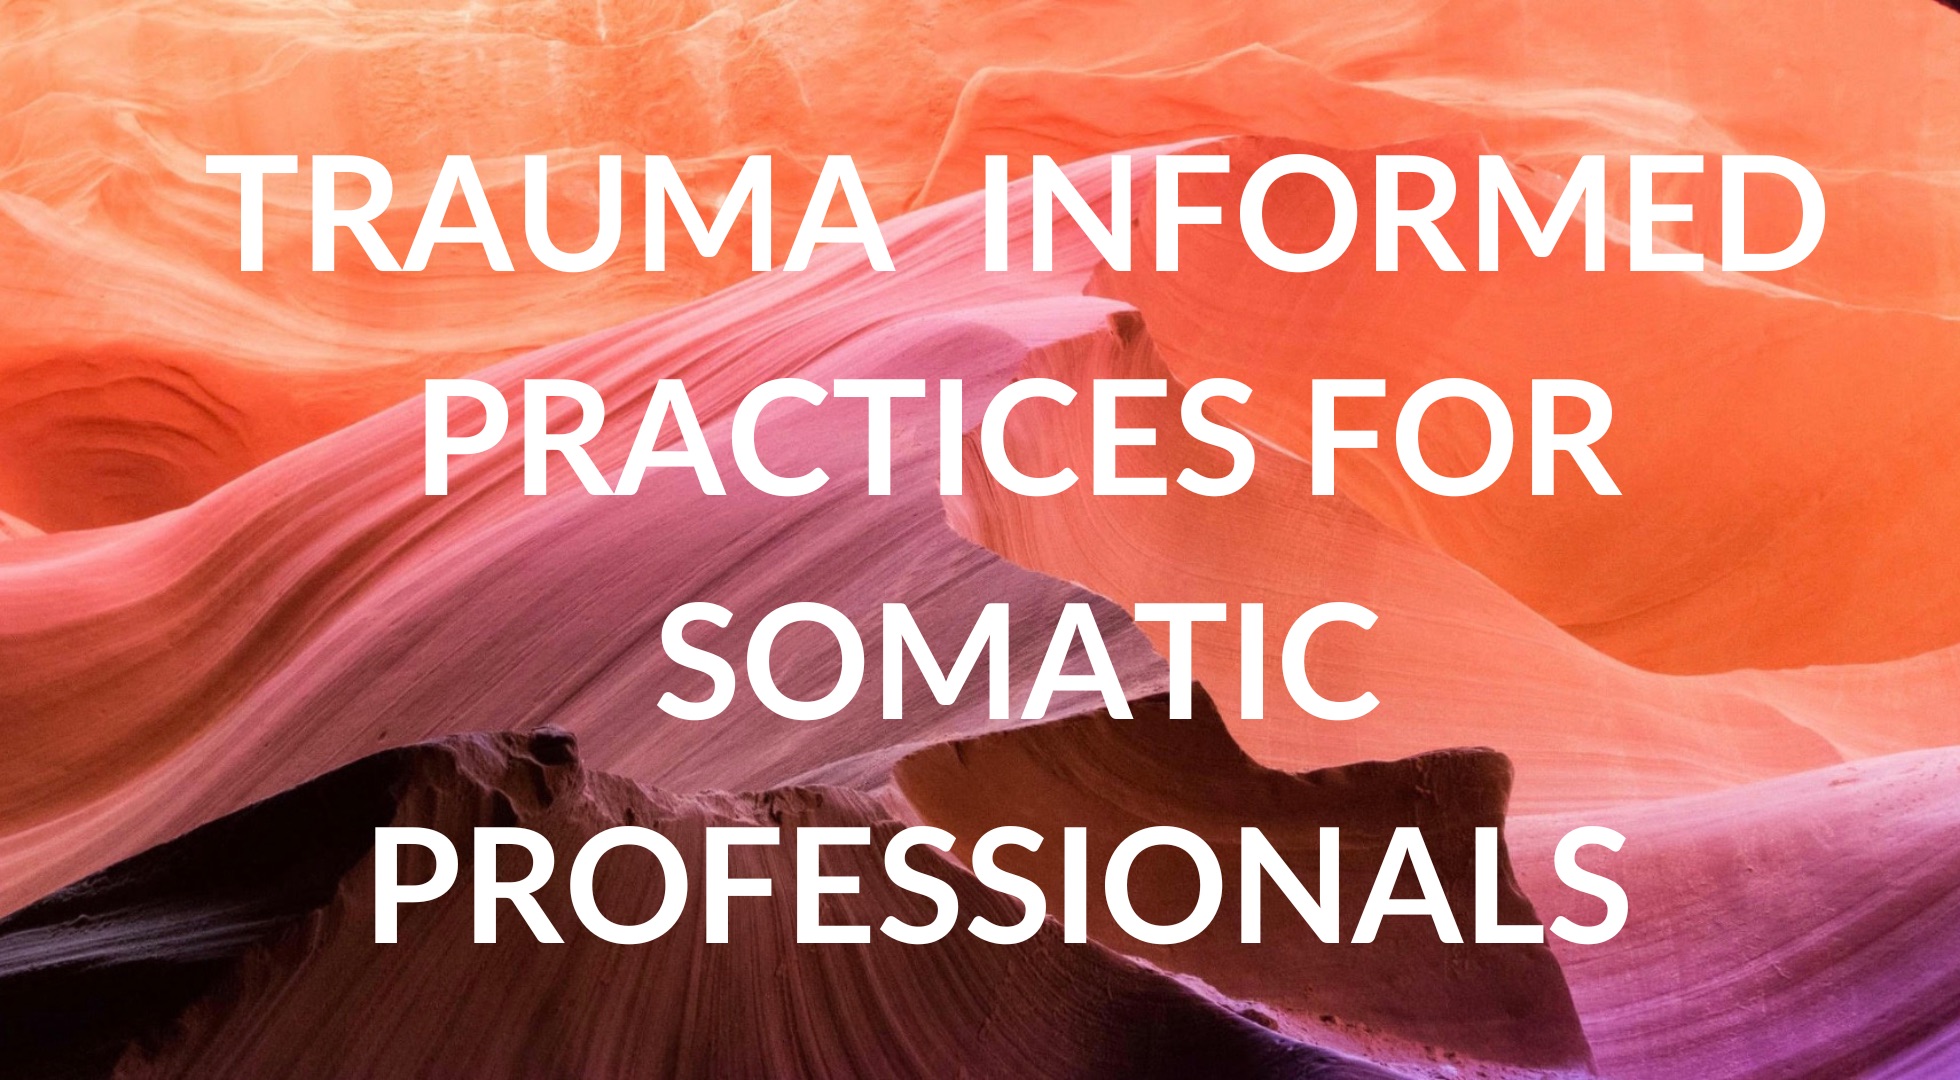 Trauma Informed Practices for Somatic Professionals LARGE